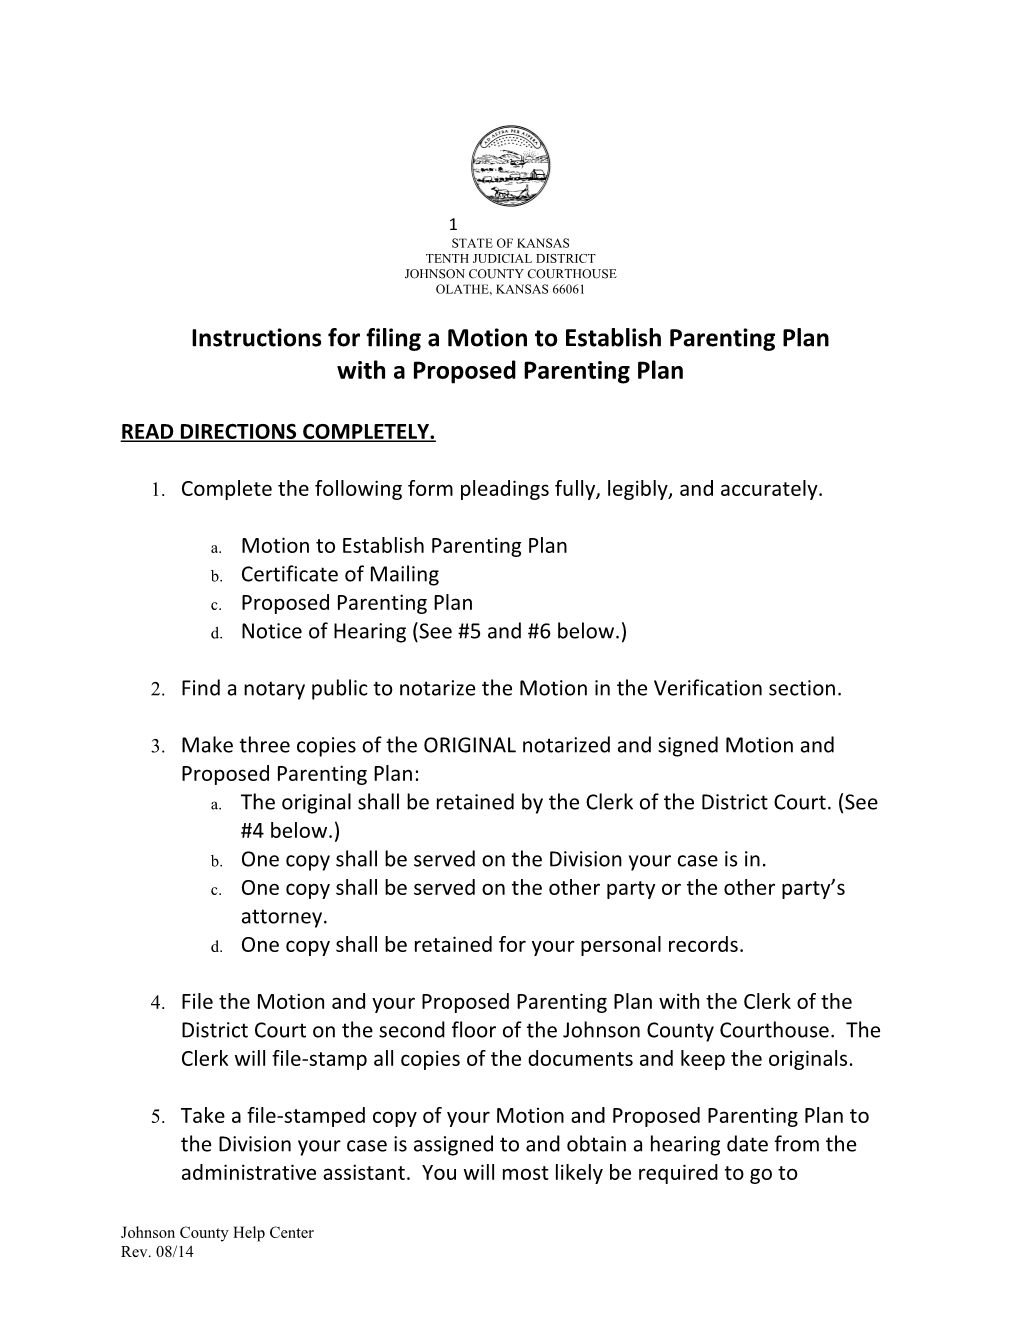 Instructions for Filing a Motion to Establish Parenting Plan